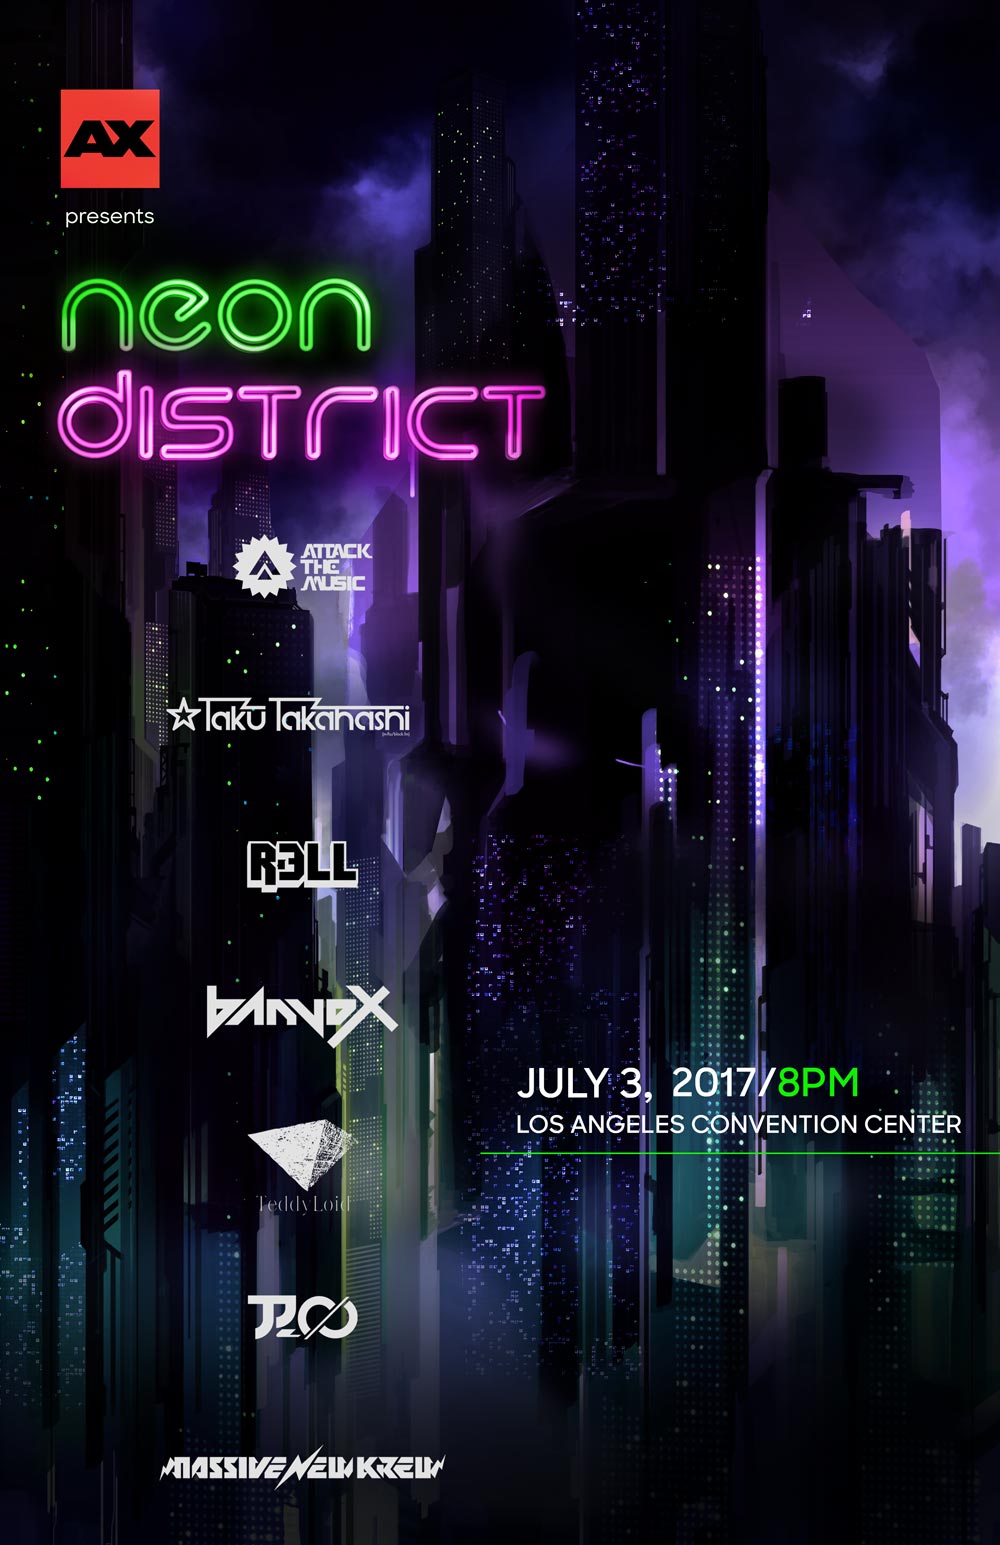 7/3 Anime Expo presents Neon District RAM RIDER official website